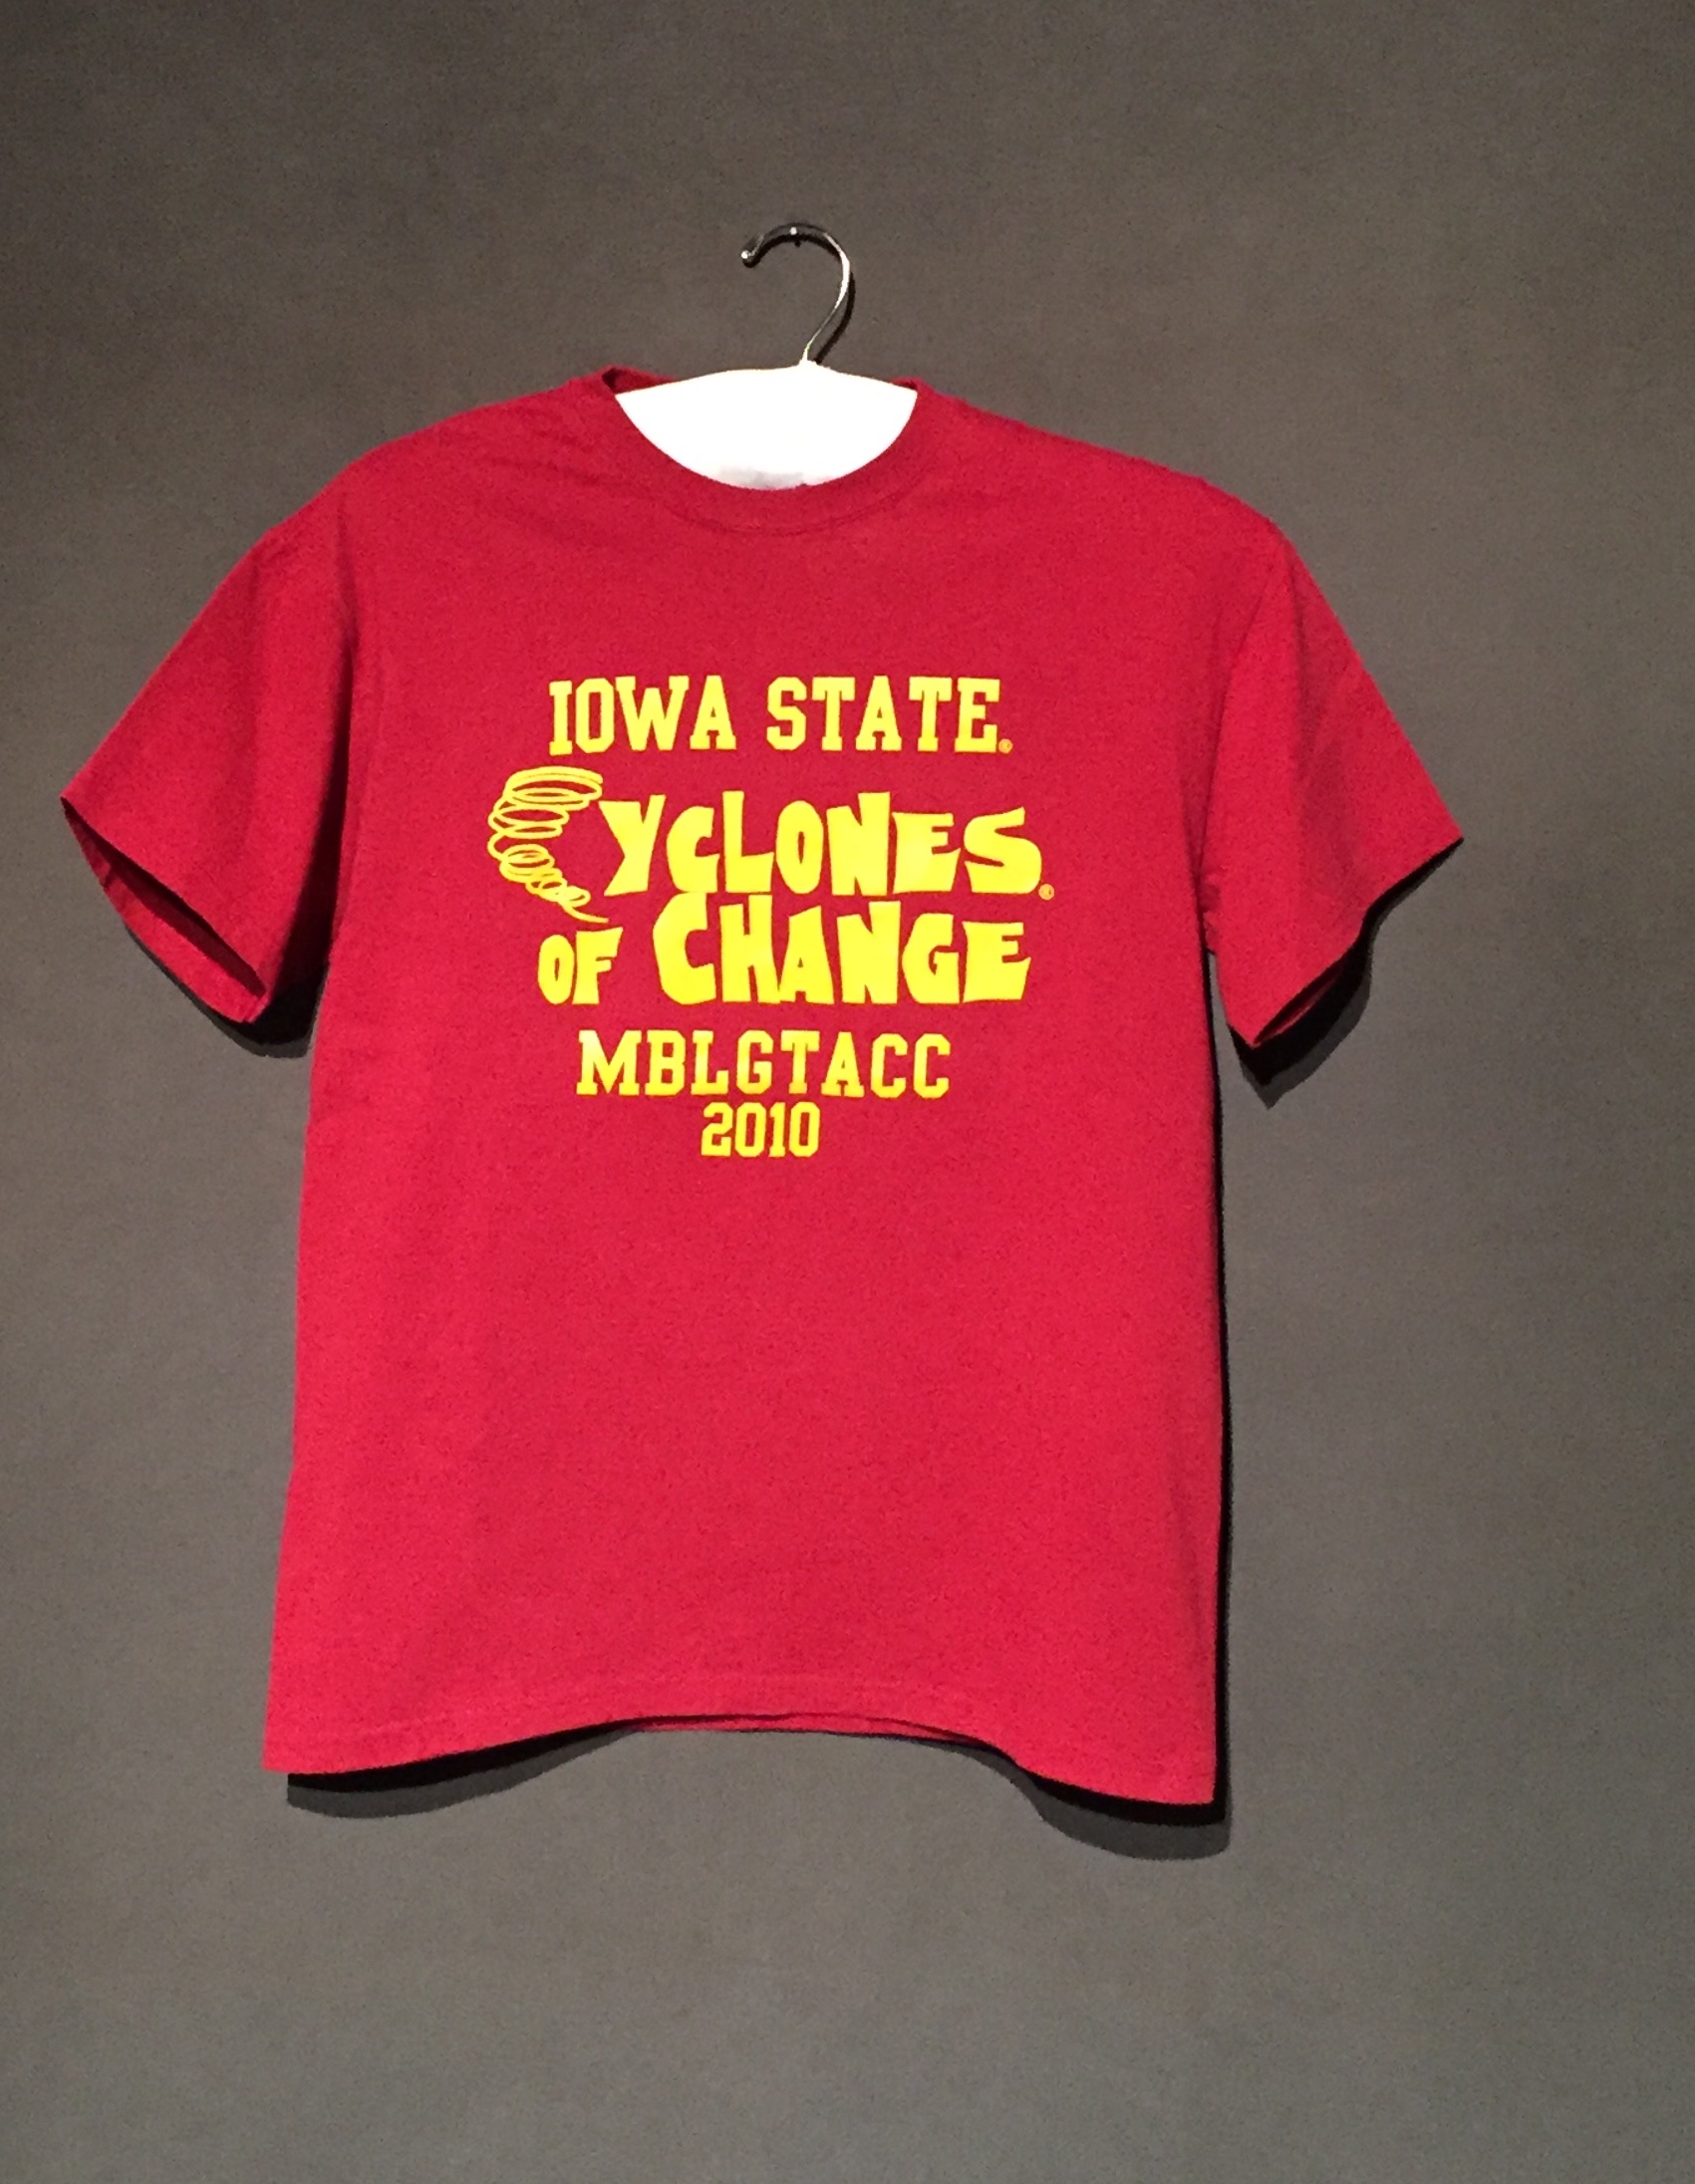 Red short sleeve t-shirt with yellow text reading: Iowa State Cyclones of Change: MBLGTACC 2010"